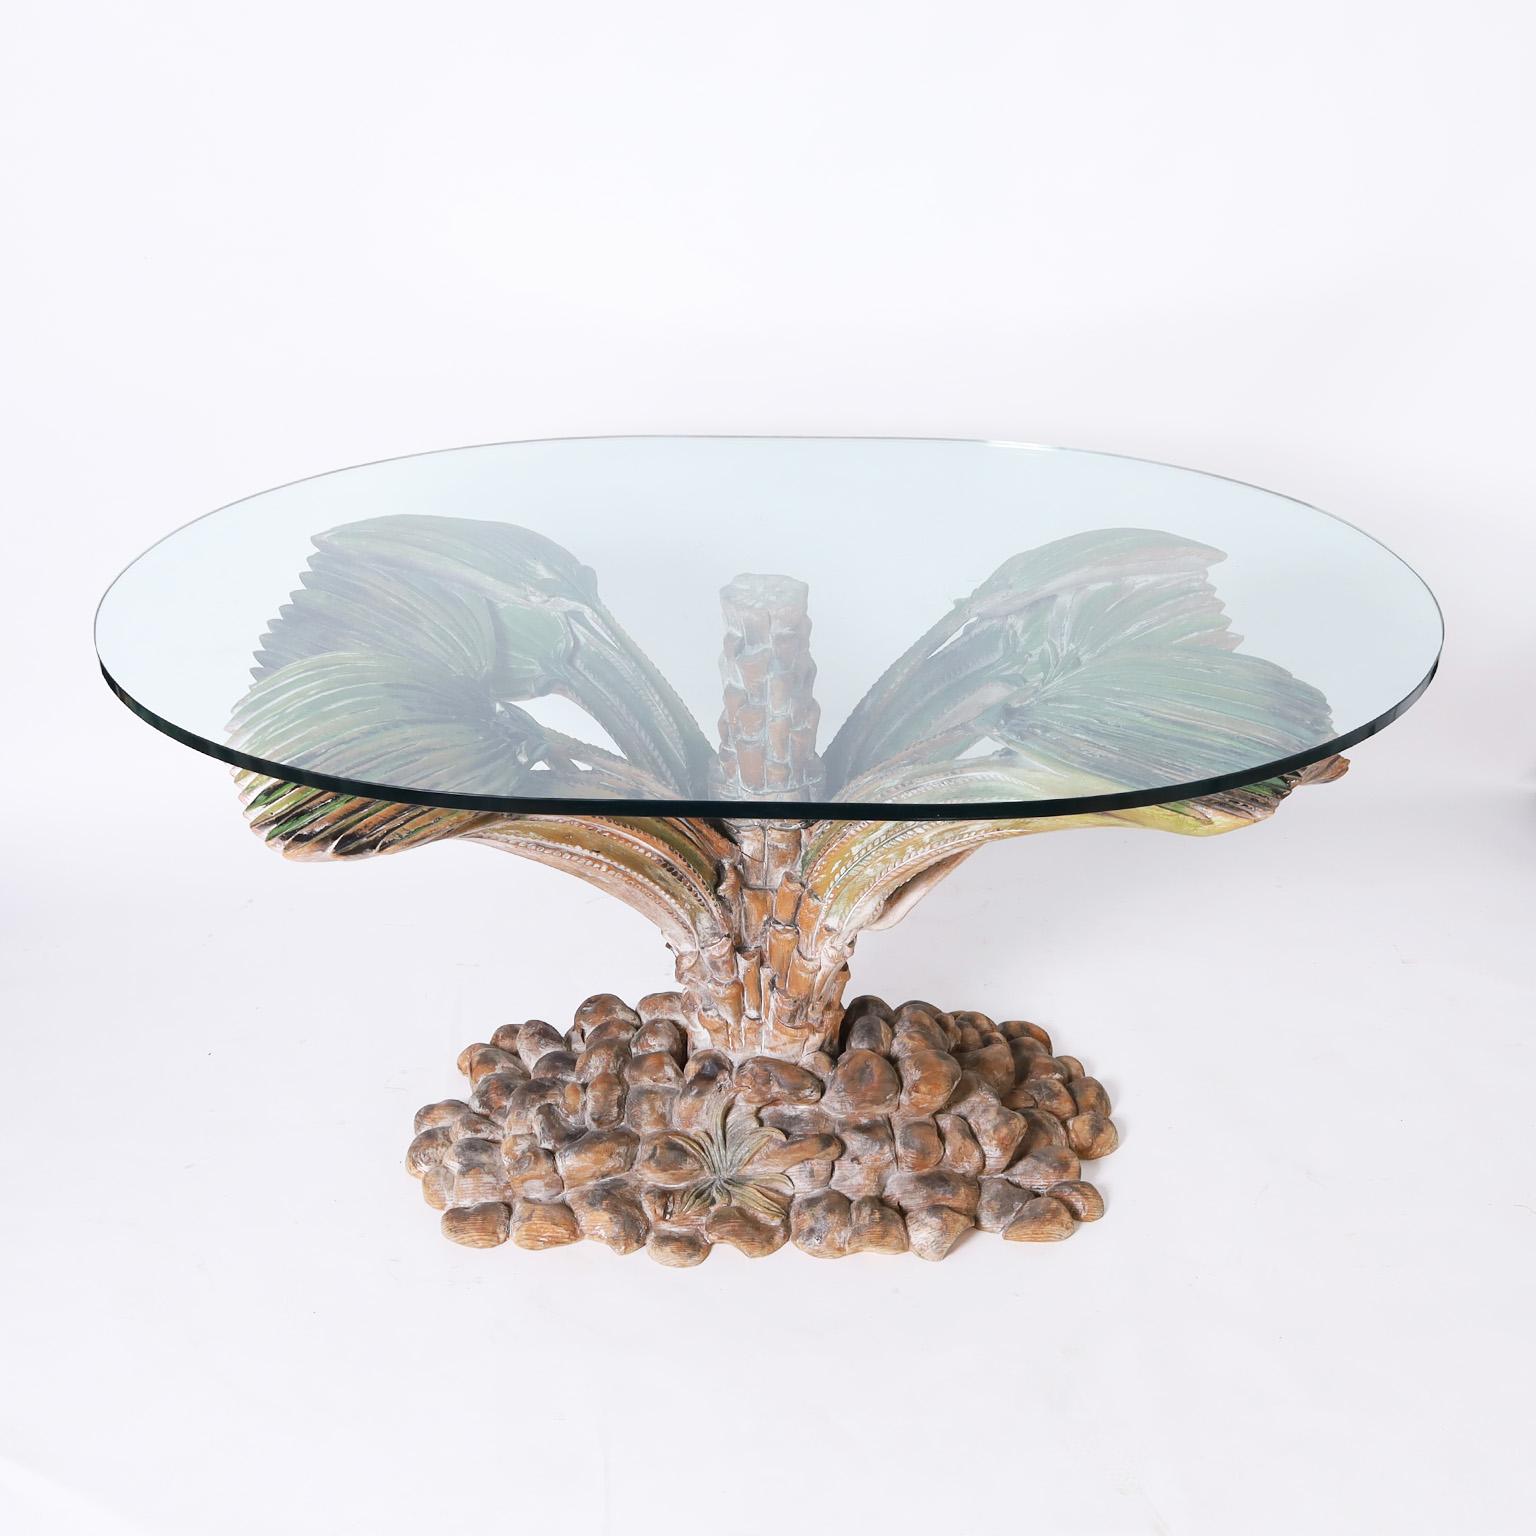 Impressive mid-century Italian dining table with an oval glass top supported by a carved and painted walnut palm plant having multiple leaves and a trunk in a faux rock pile base. Increasing the size of the glass top will allow for a larger dining